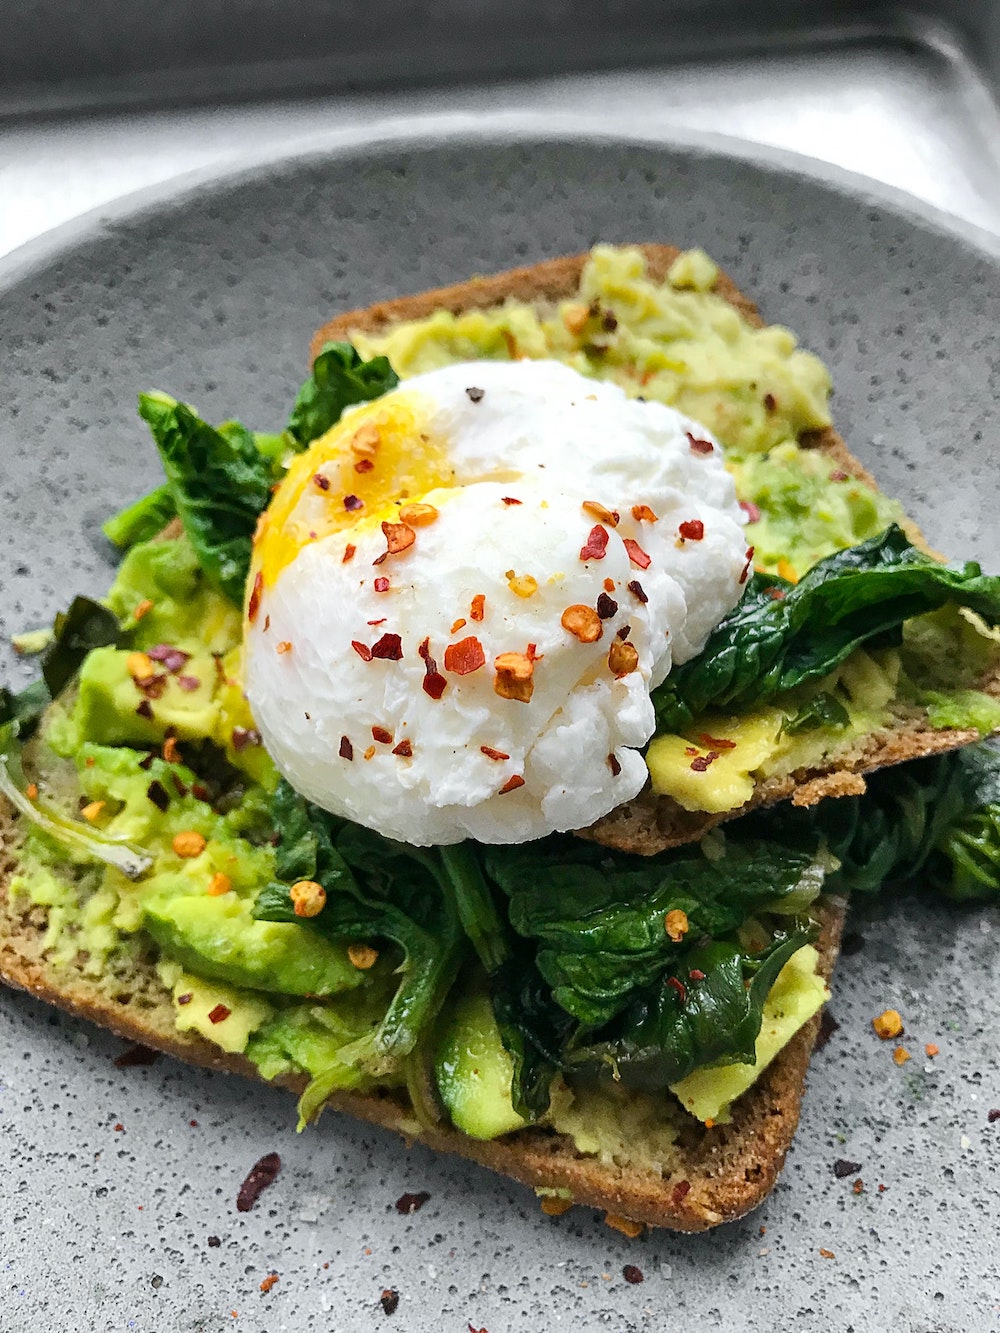 Avocado Toast with Egg - Our Healthy Lifestyle